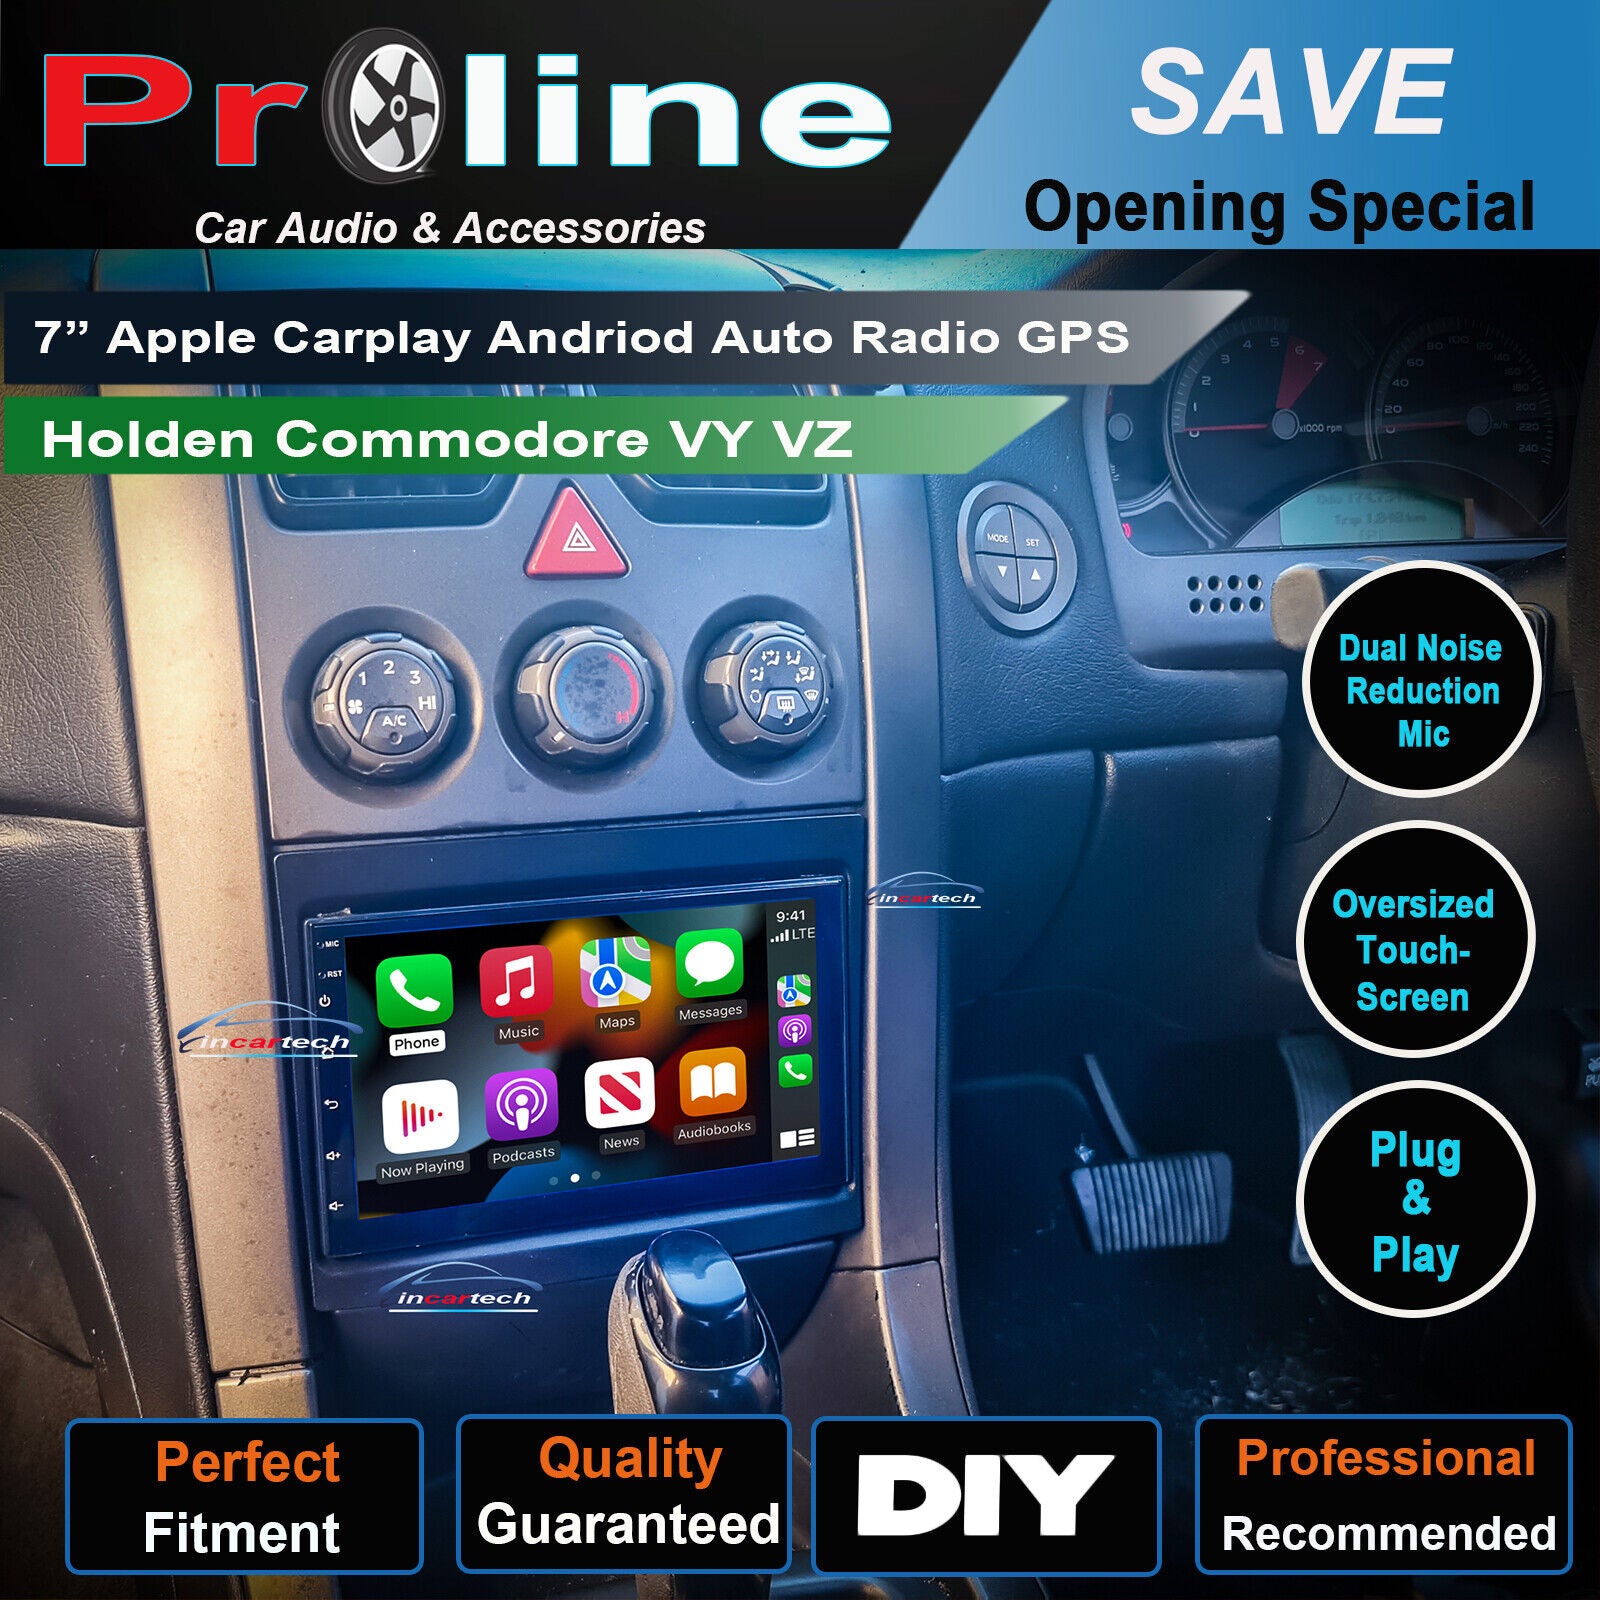 7 Inch Double Din Car Stereo with Voice Control Apple Carplay & Androi –  ESLYYDS